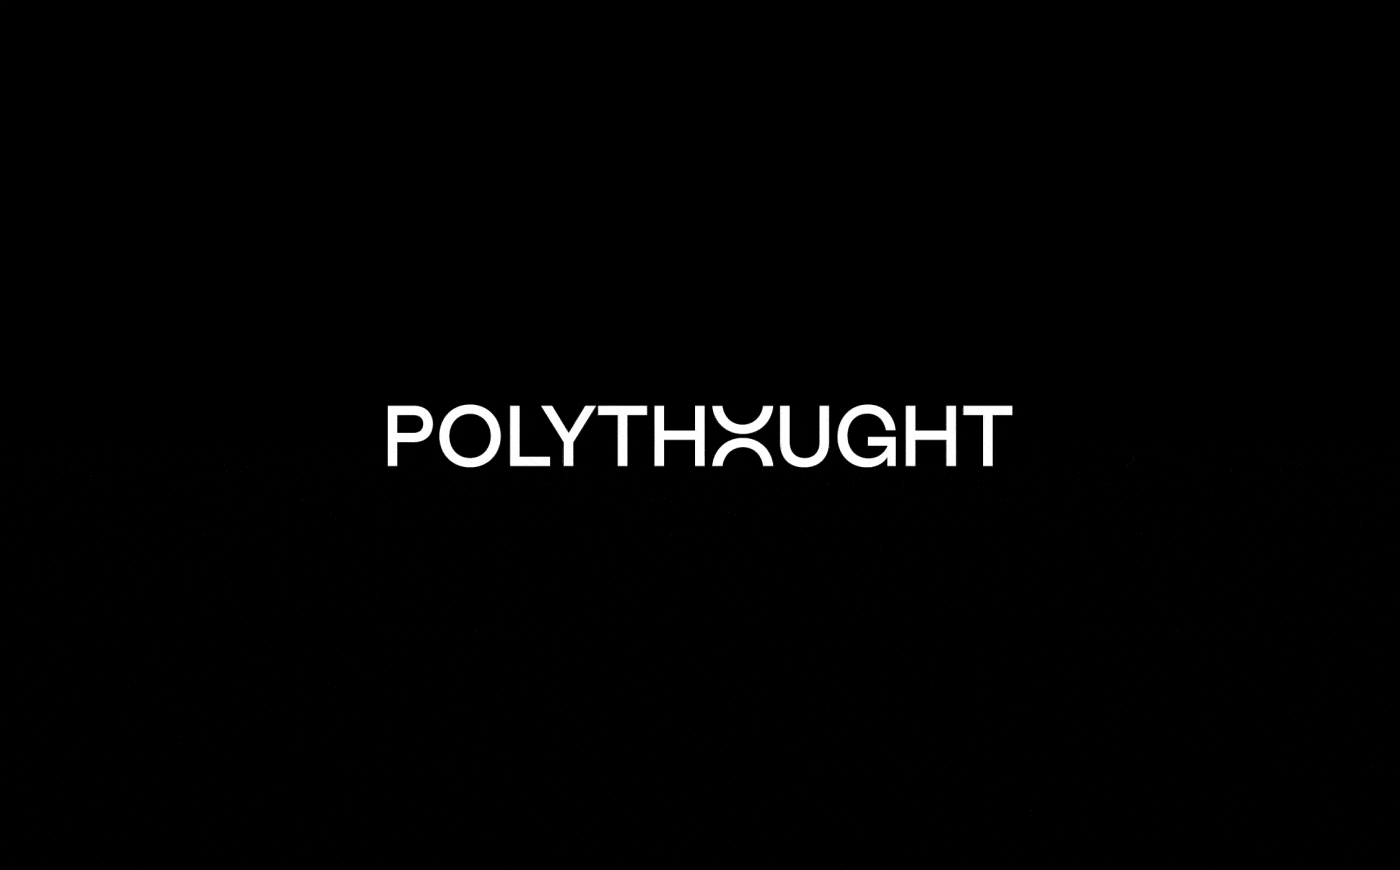 Polythought_WebCaseStudy_